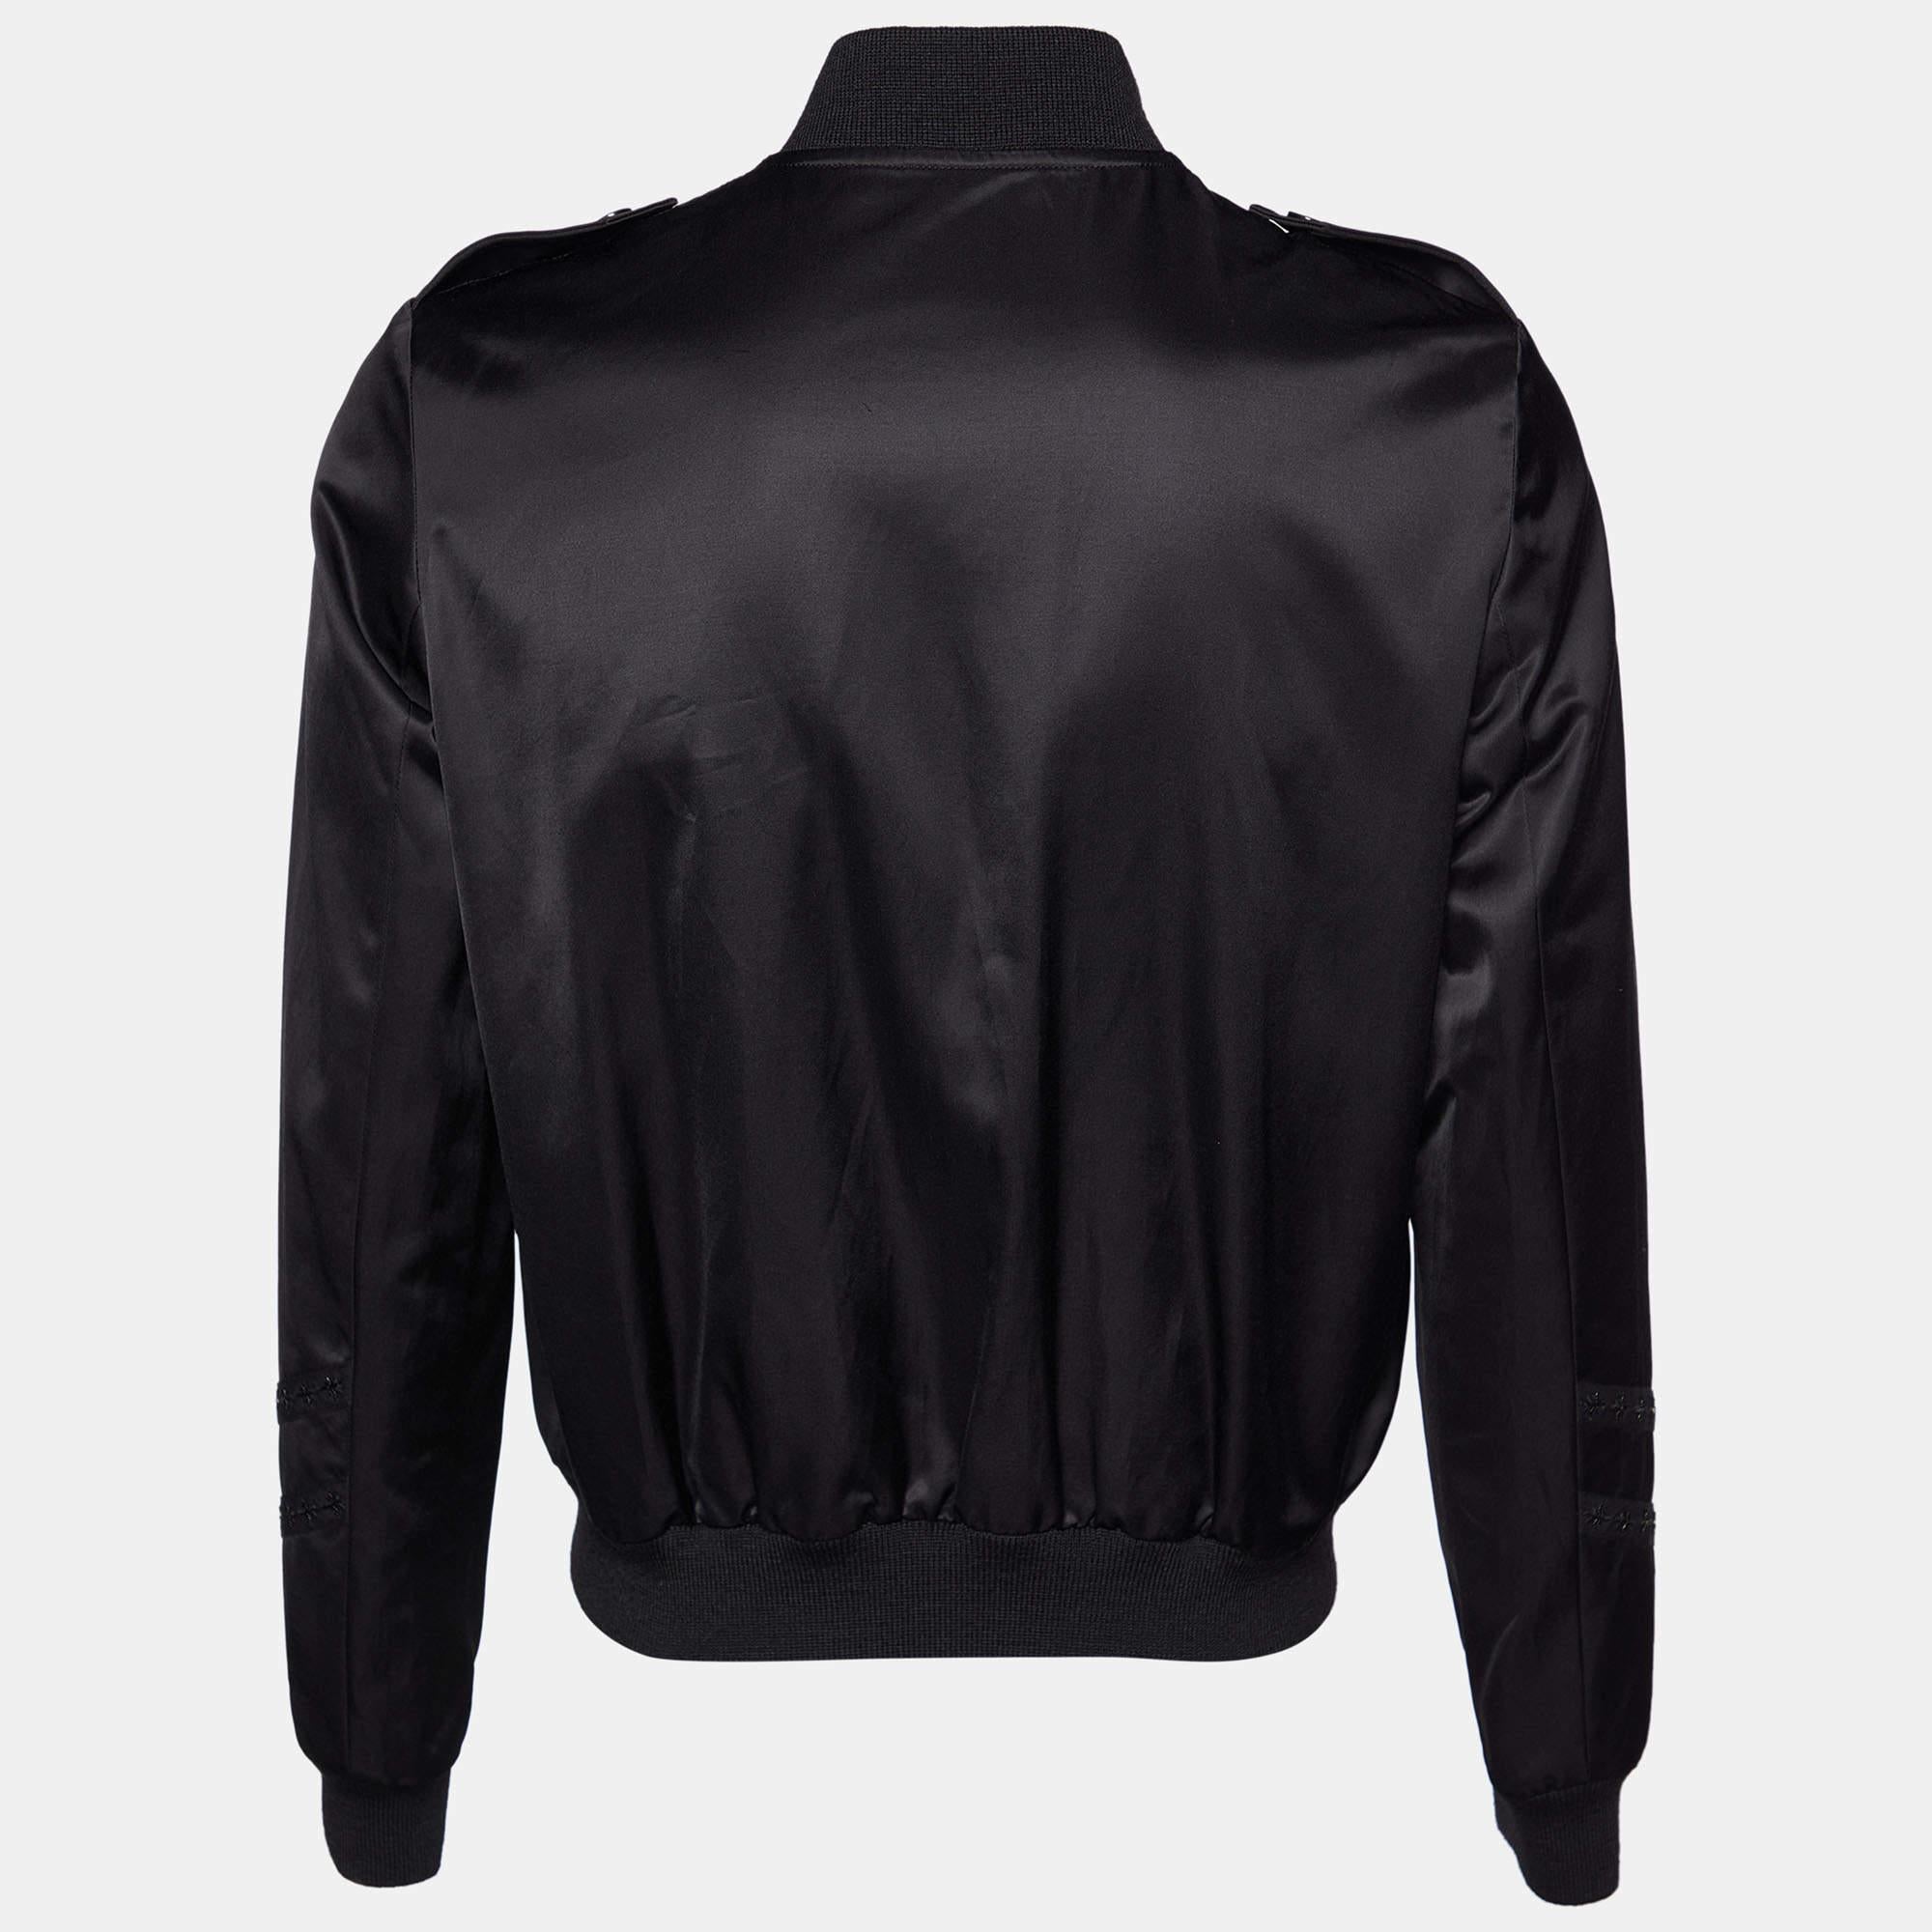 This Saint Laurent black jacket offers the satisfaction of a comfortable fit and refined style. It is made of satin and designed with a front zipper, embellishments, and long sleeves.

Includes: Brand Tag